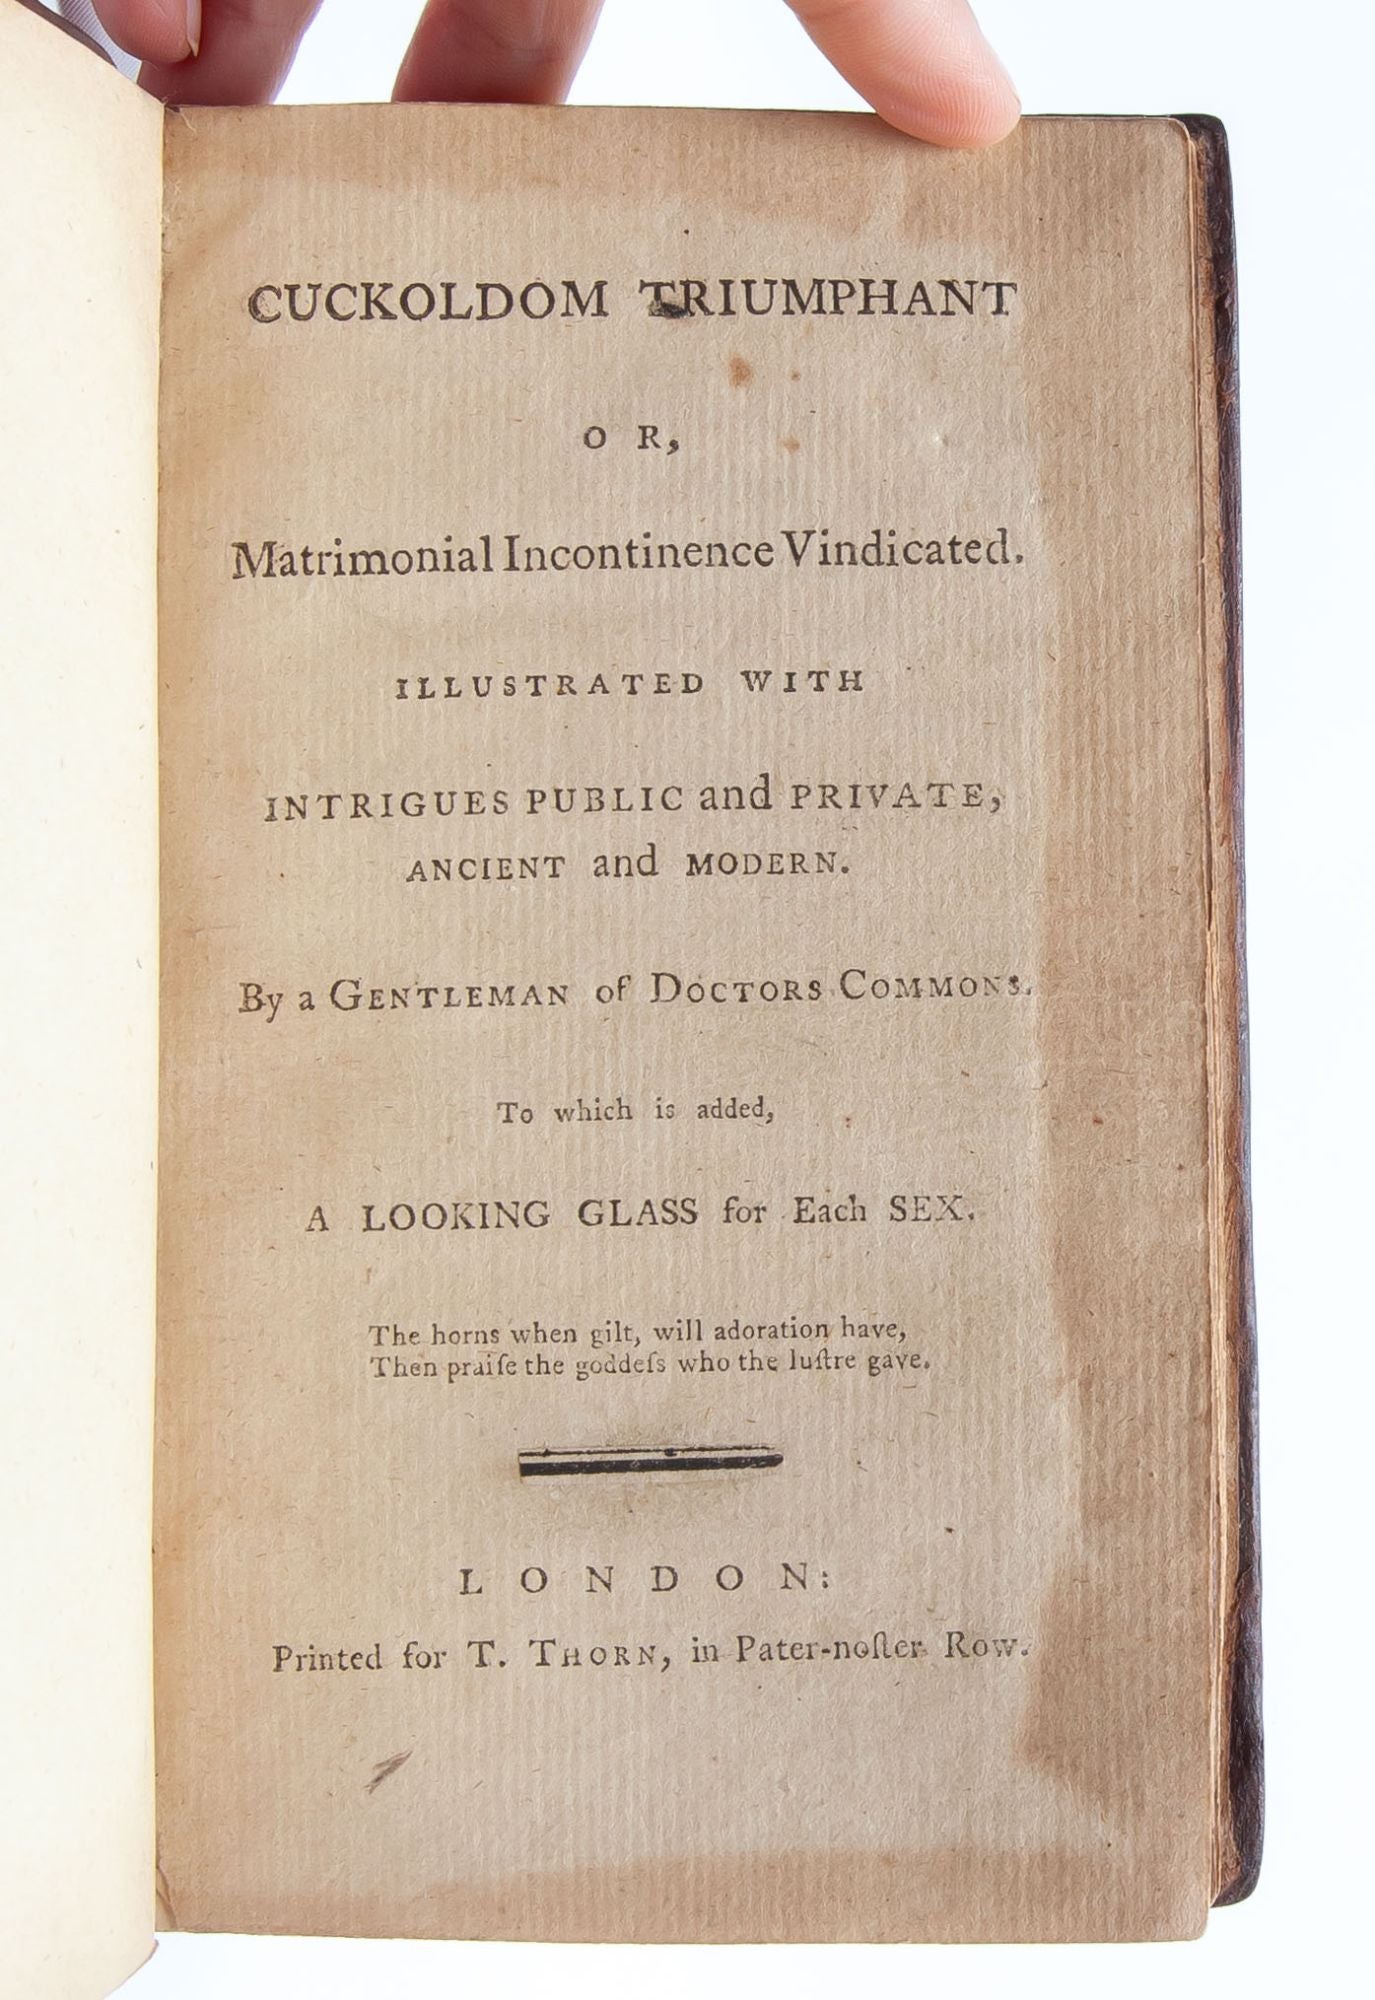 Cuckoldom Triumphant; or, Matrimonial Incontinence Vindicated...To which is added A Looking Glass for Each Sex Erotic Literature, A Gentleman of Doctors Commons, Cornuto First edition